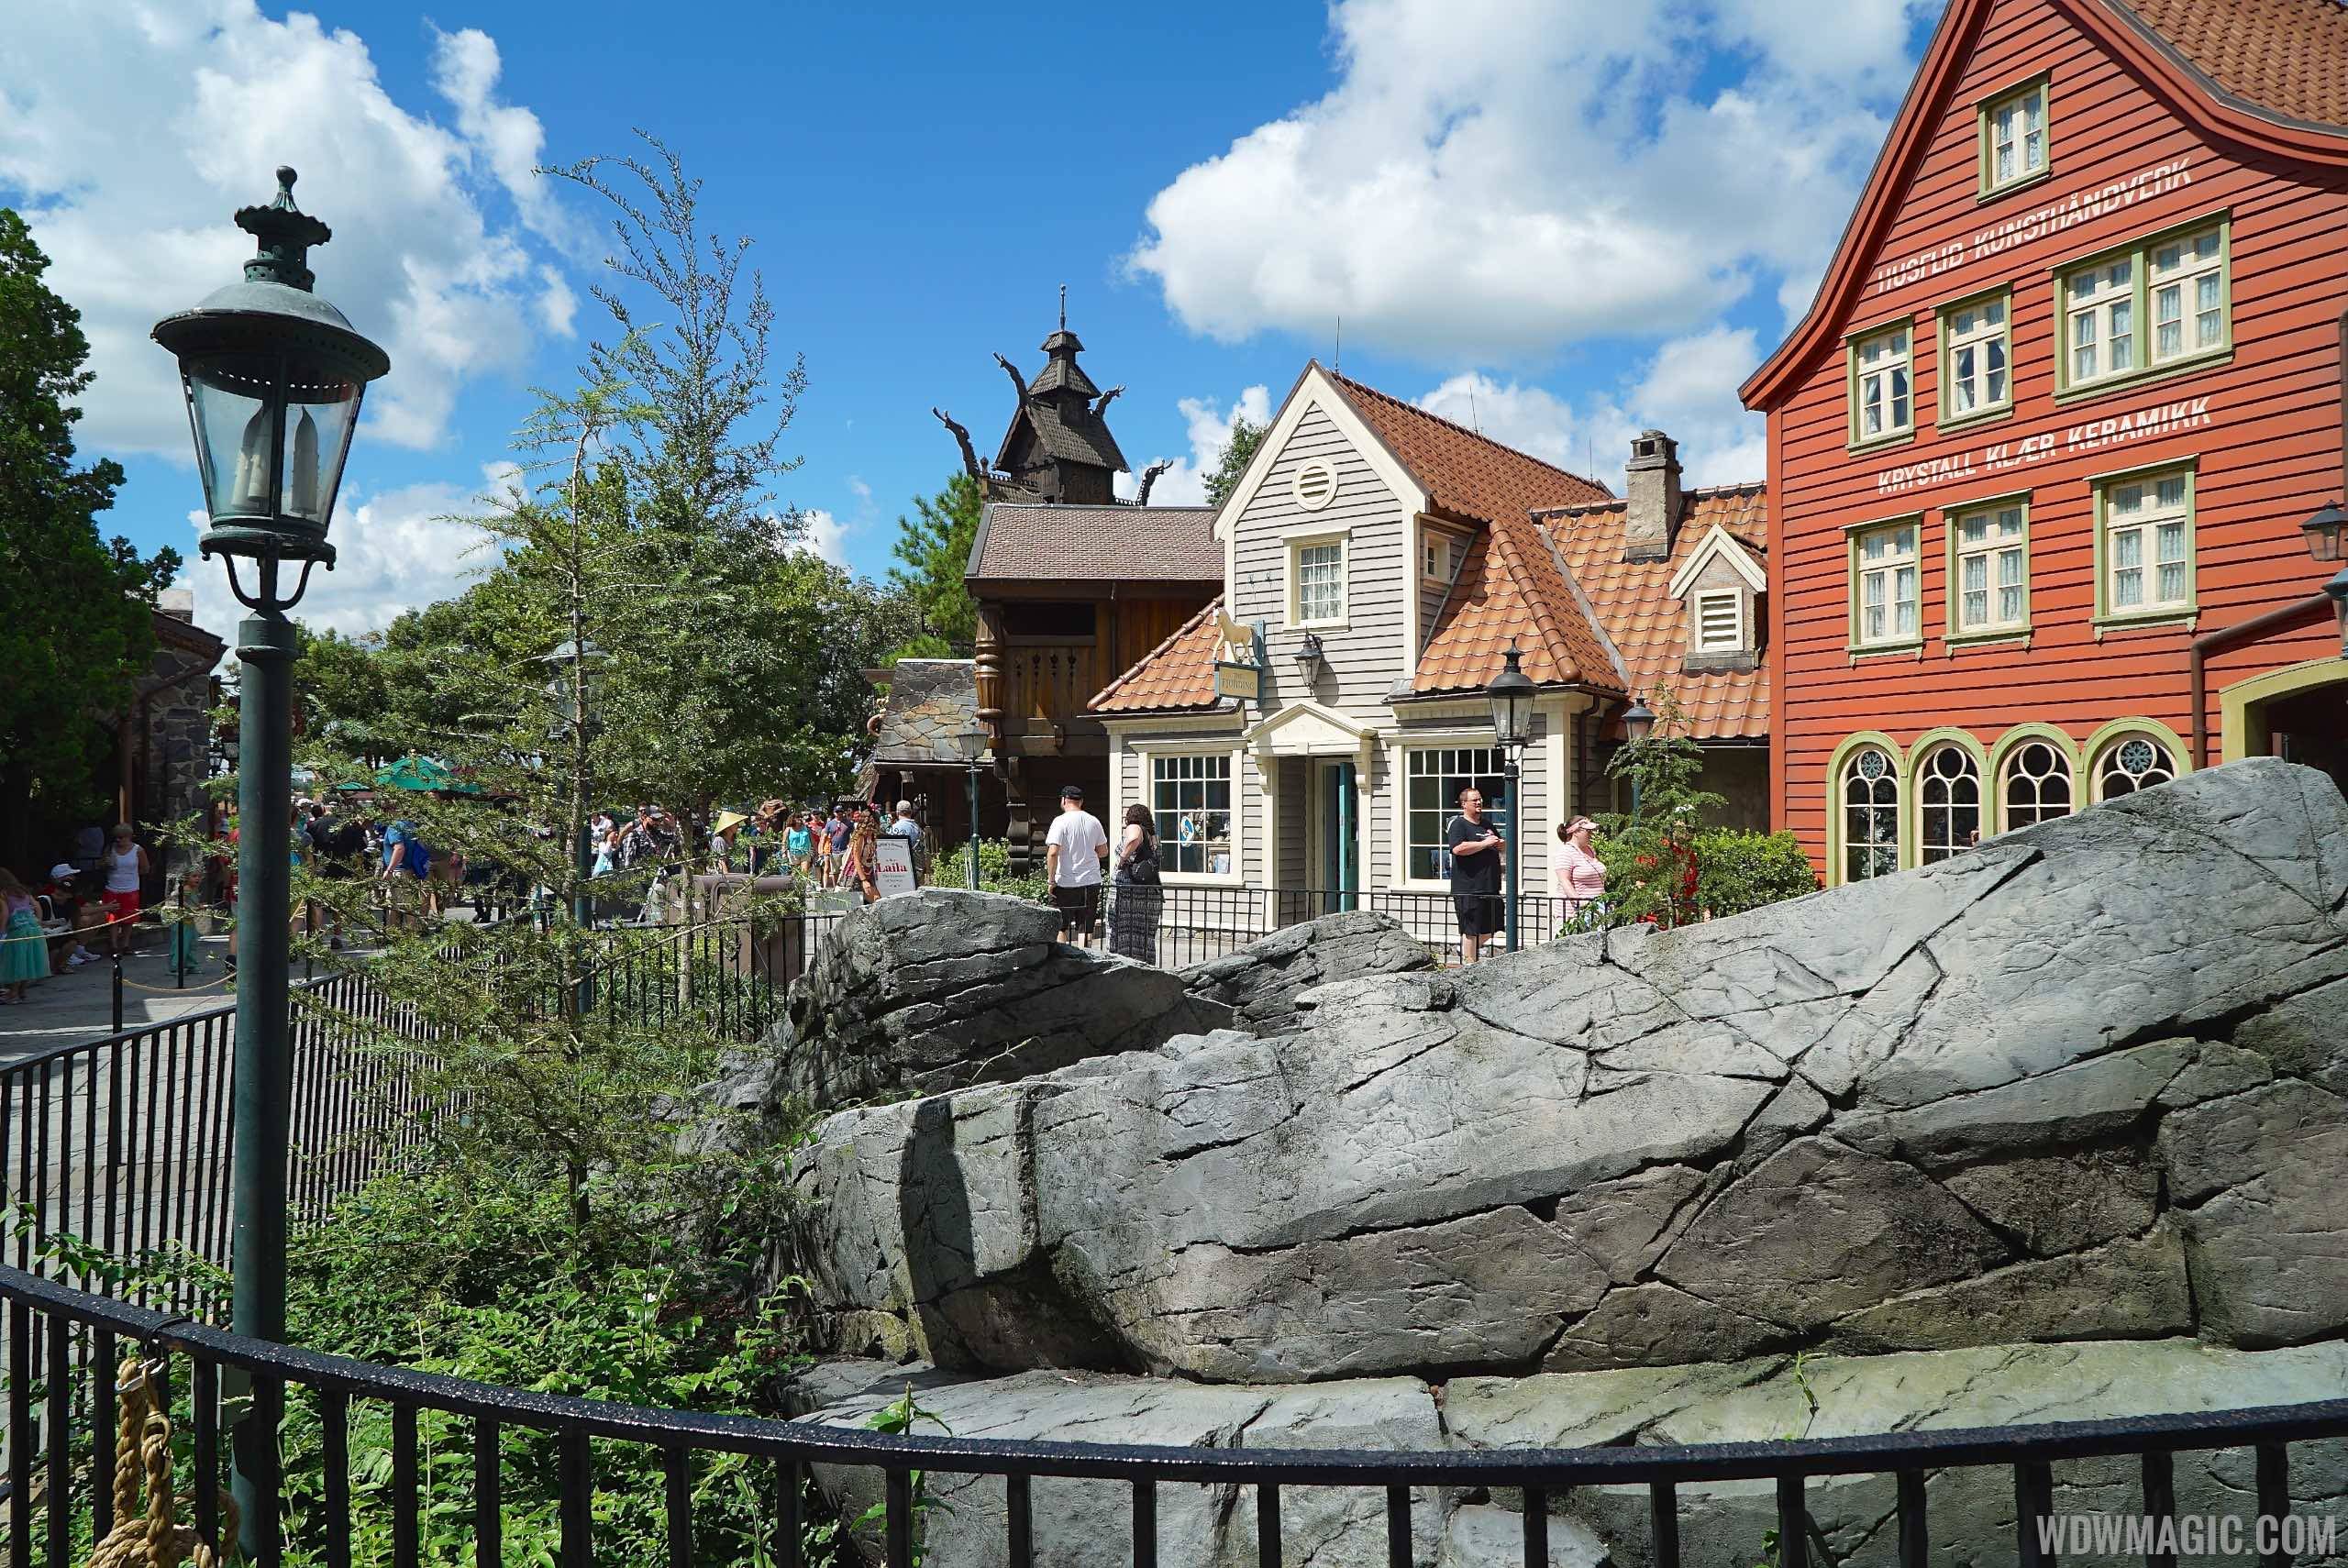 AAA Story Telling Experience moves to the Norway Pavilion at Epcot